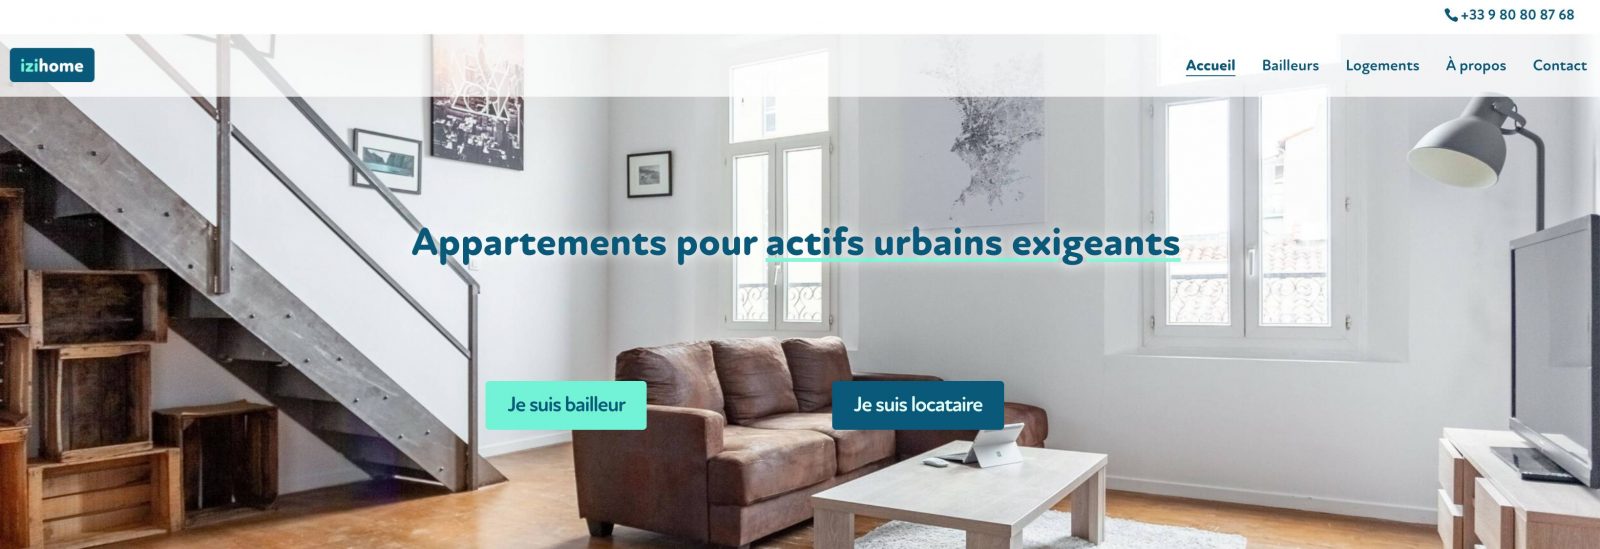 Izihome Startup Proptech Rent